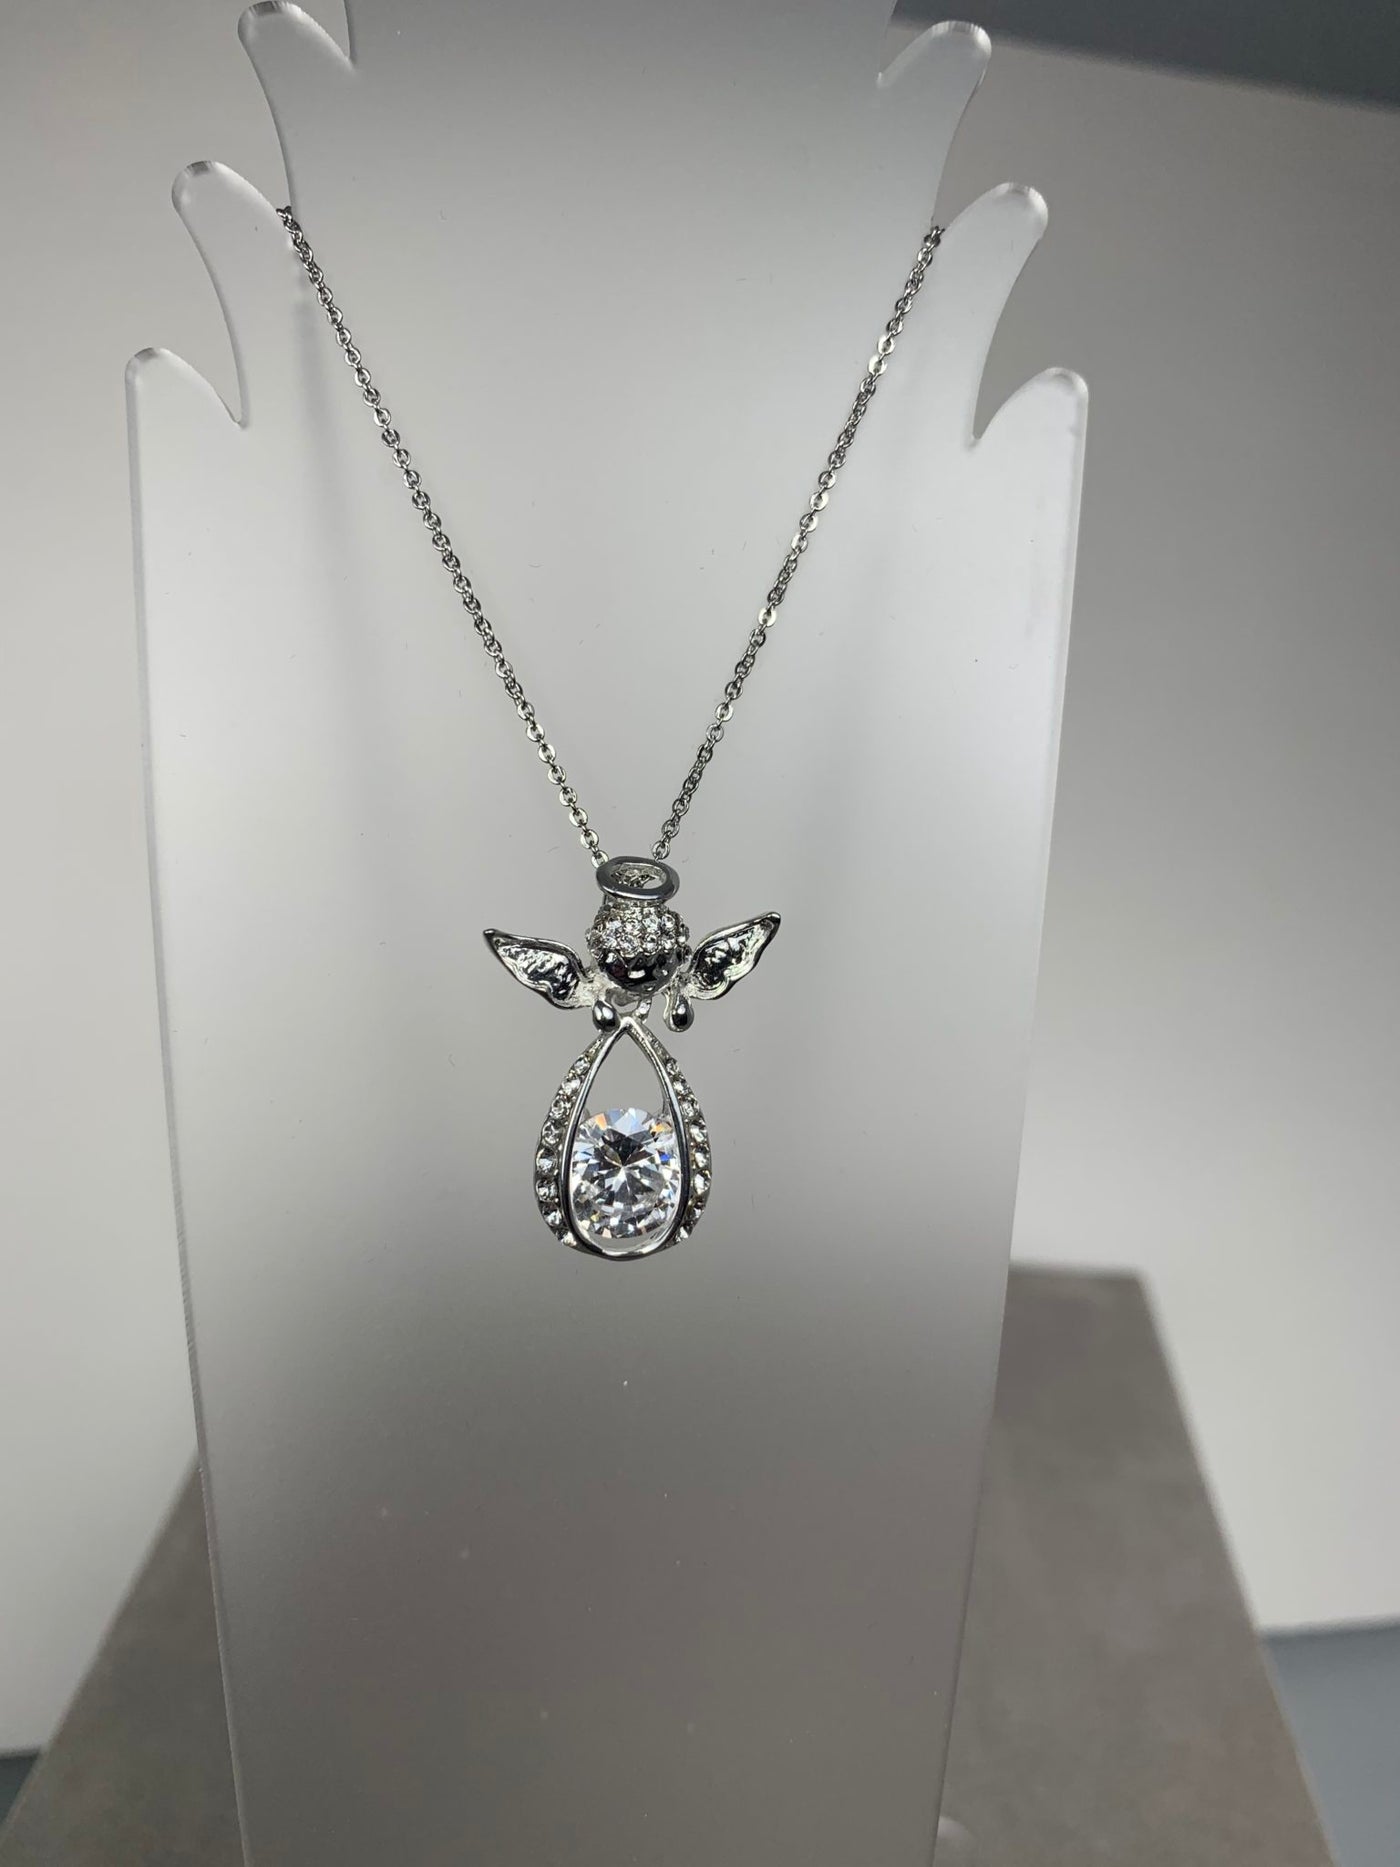 Crystal Angel Pendant Necklace in Silver Tone